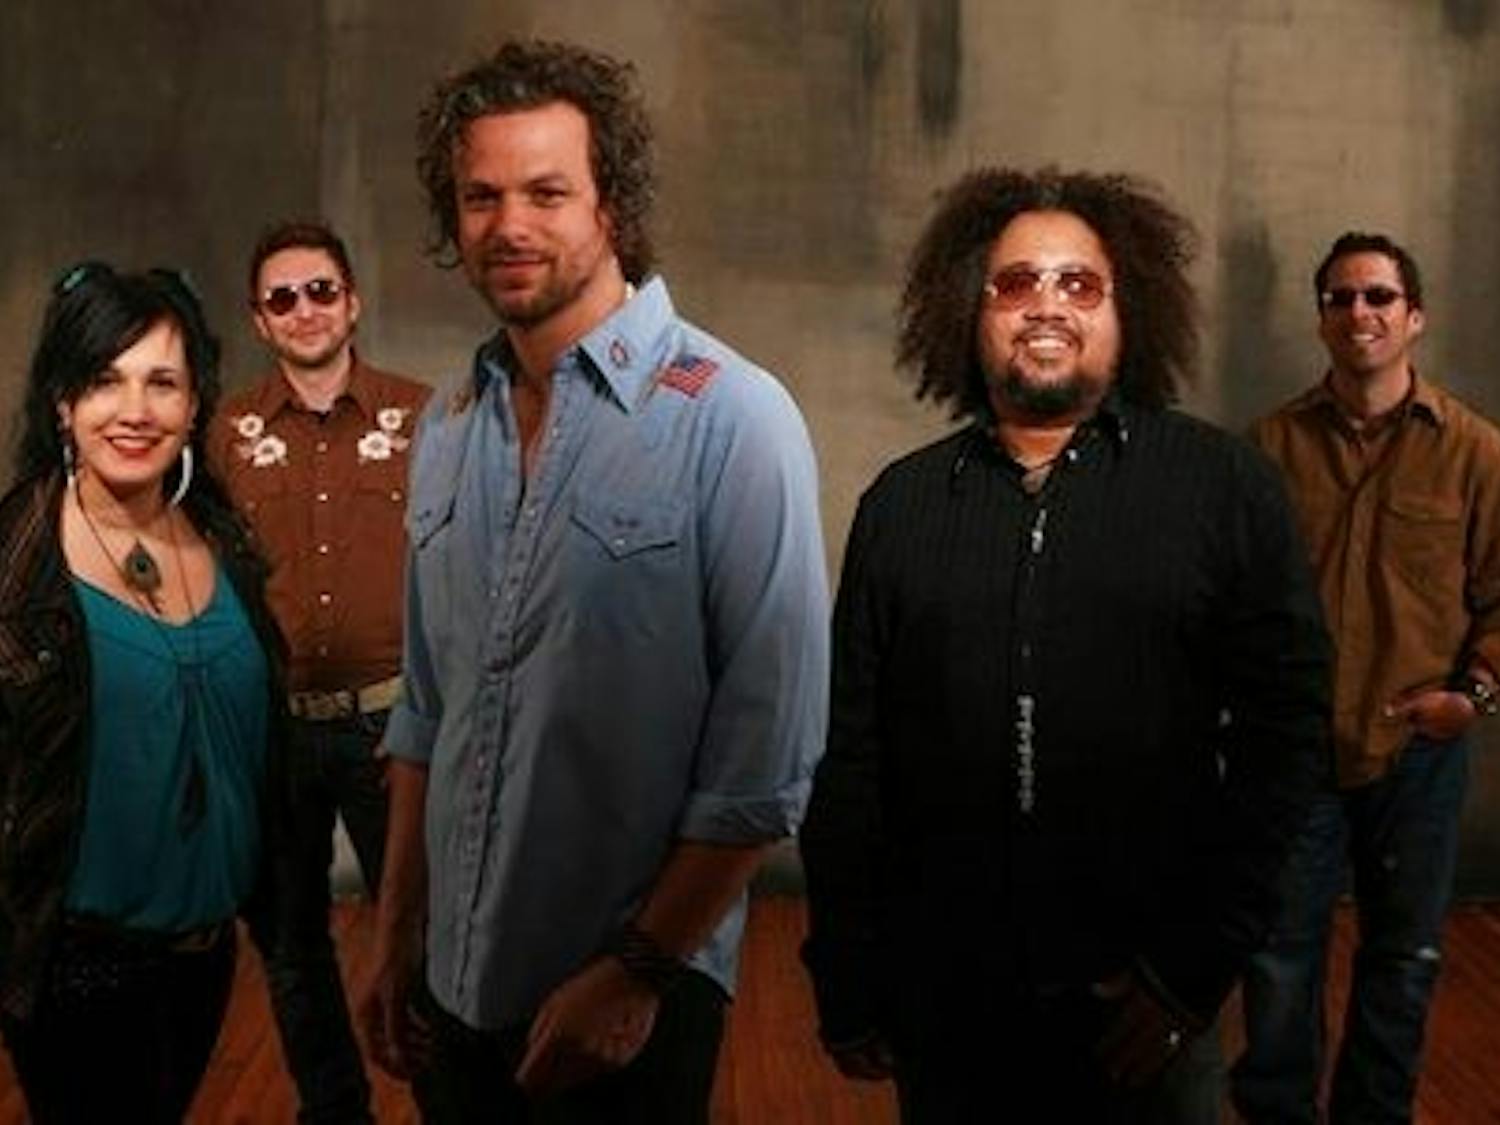 Pittsburgh-based rock band Rusted Root will perform at the Hopkins Center for the Arts on Thursday.